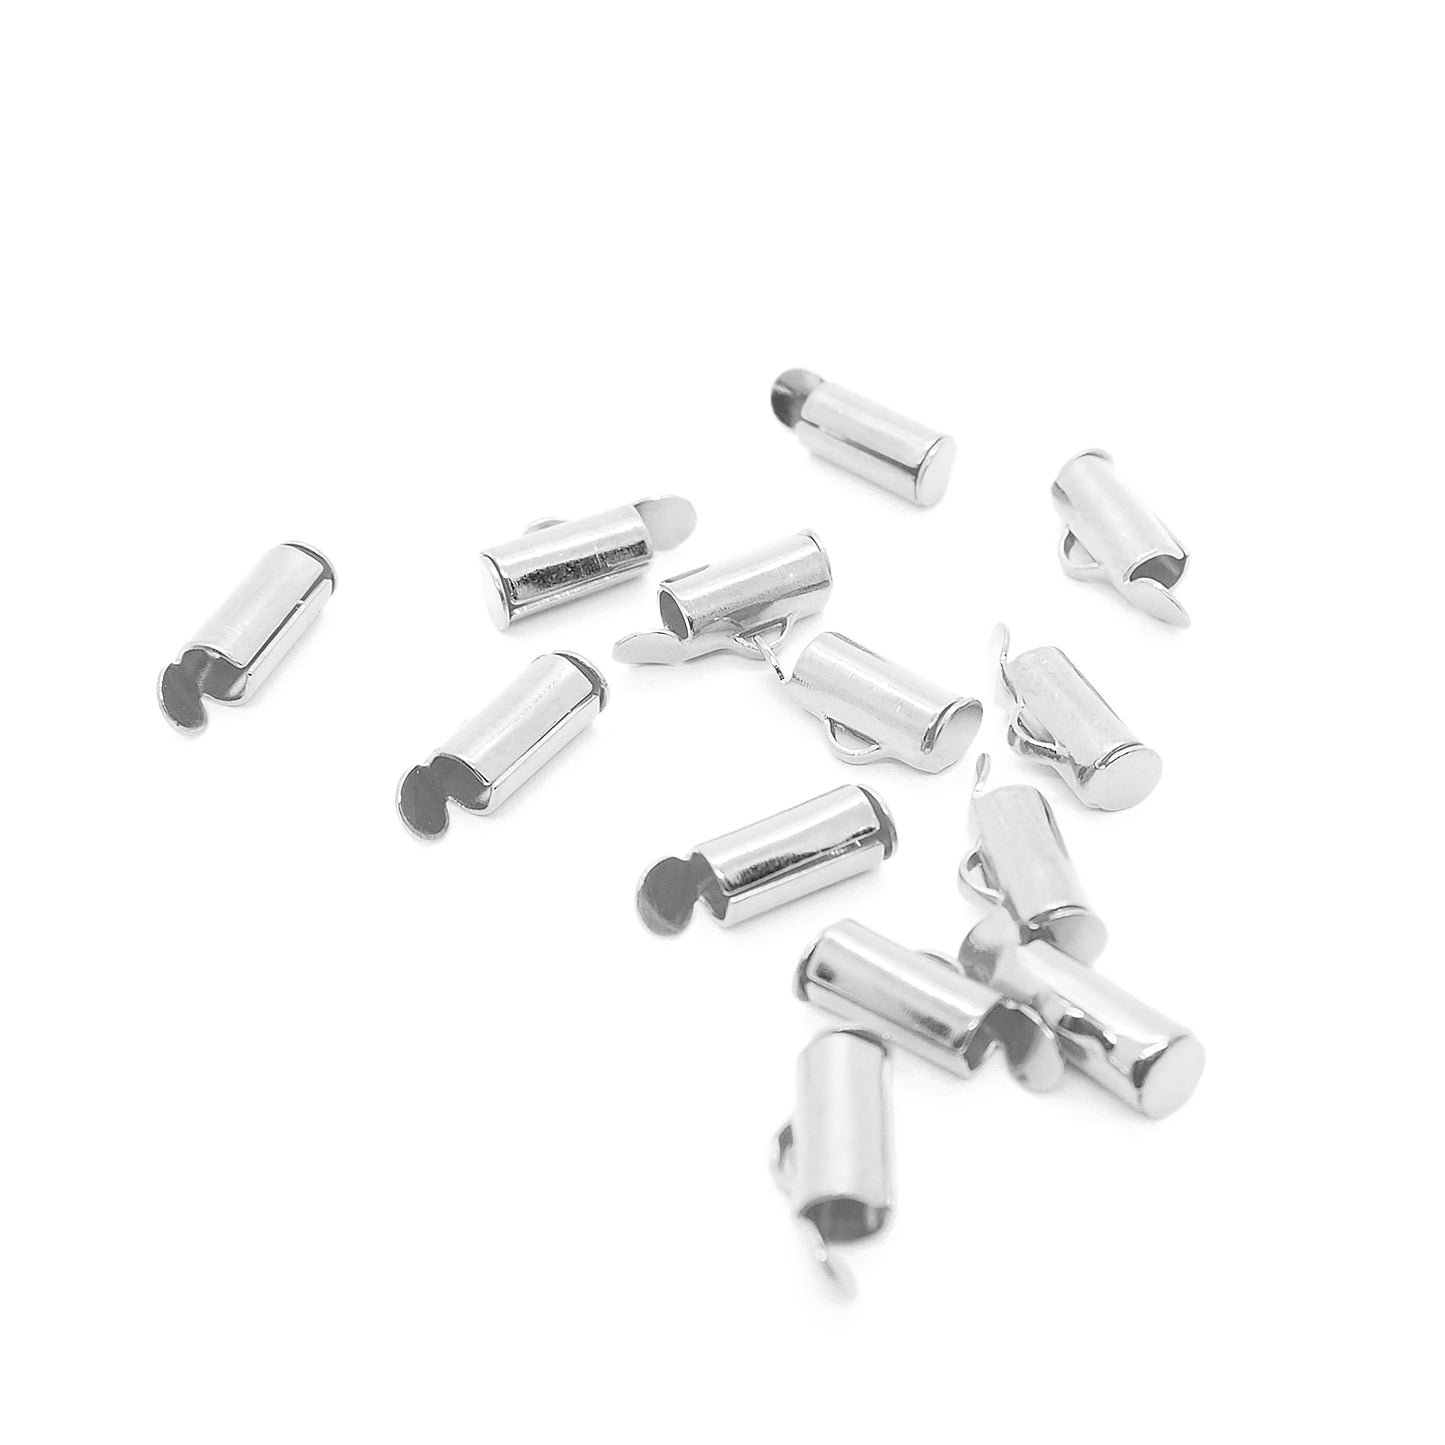 Hinged end piece end cap / silver-colored / 9mm